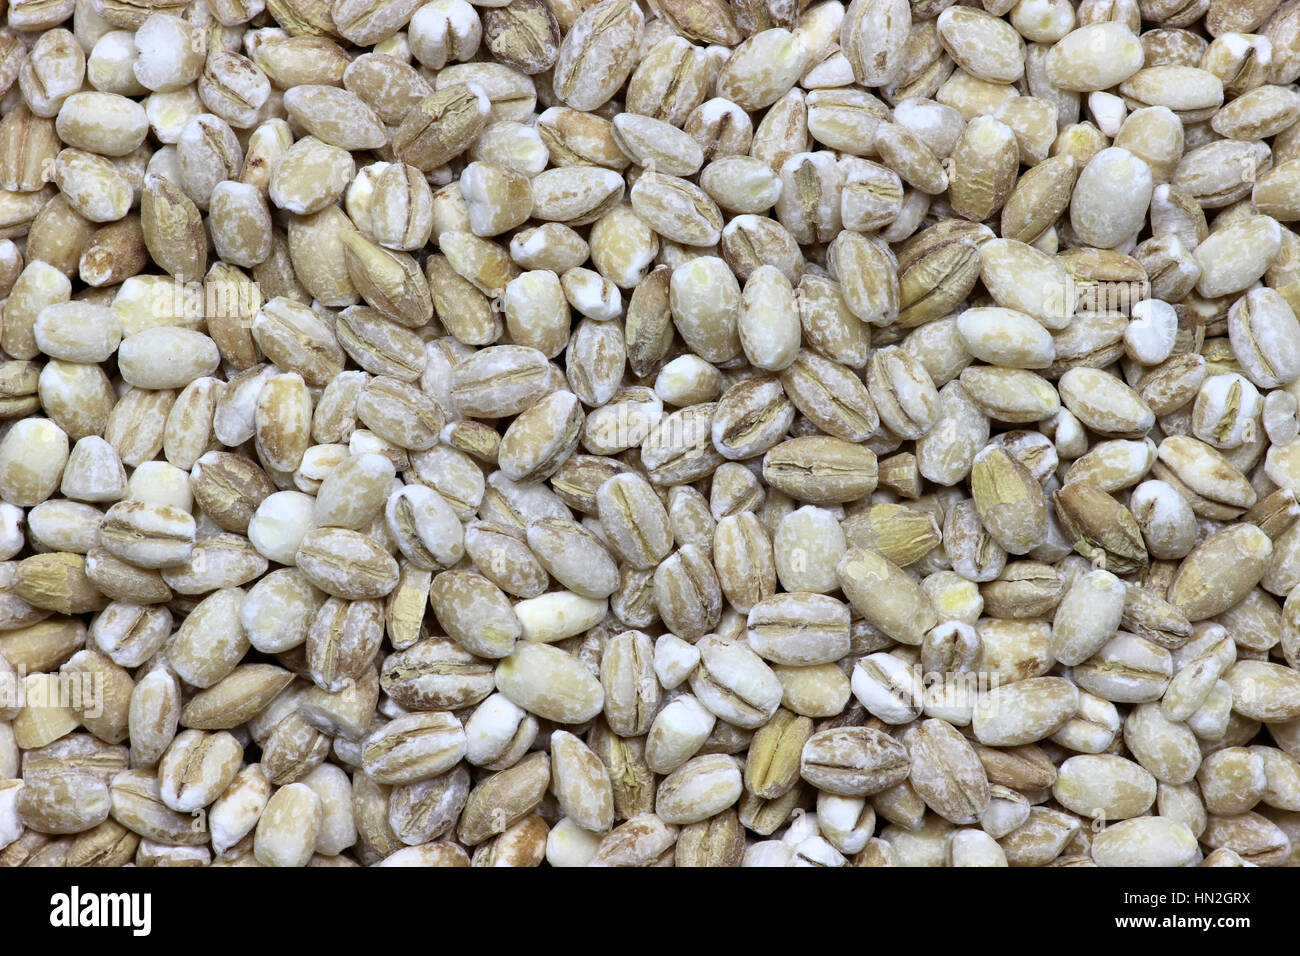 barley grains for background use Stock Photo